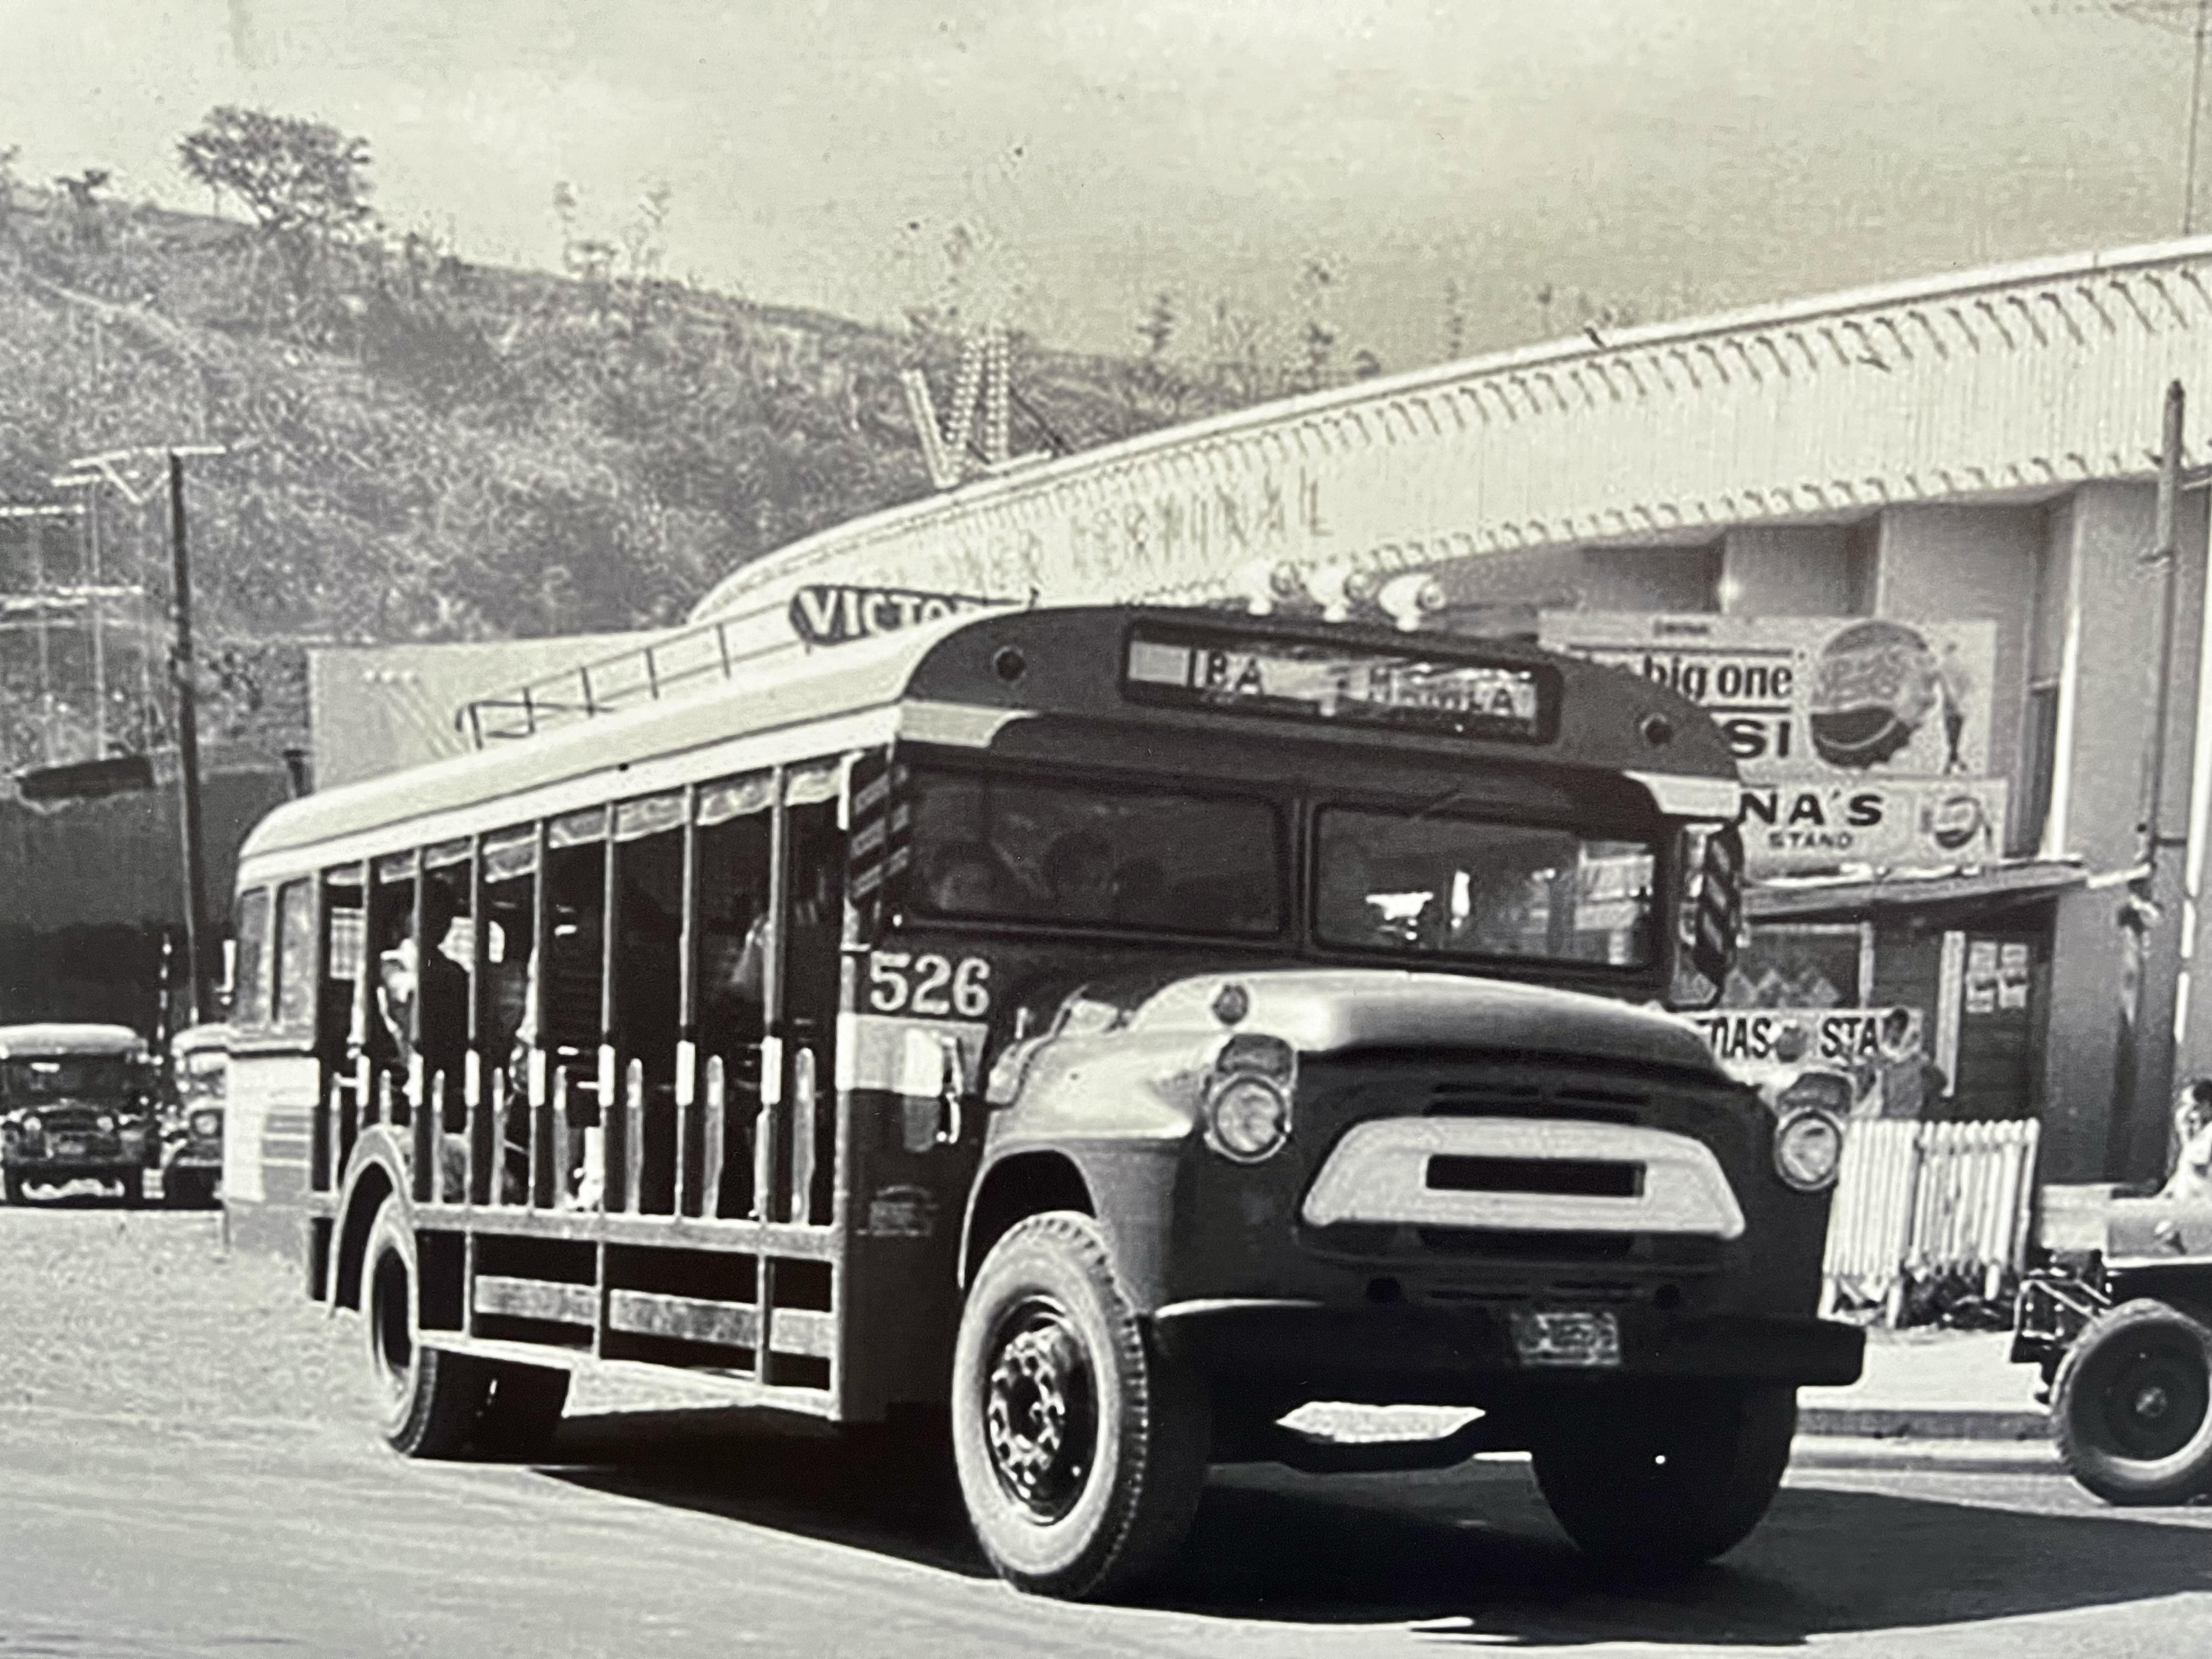 Victory Liner's Vintage Bus Restoration: A Tribute to 78 Years of Excellence